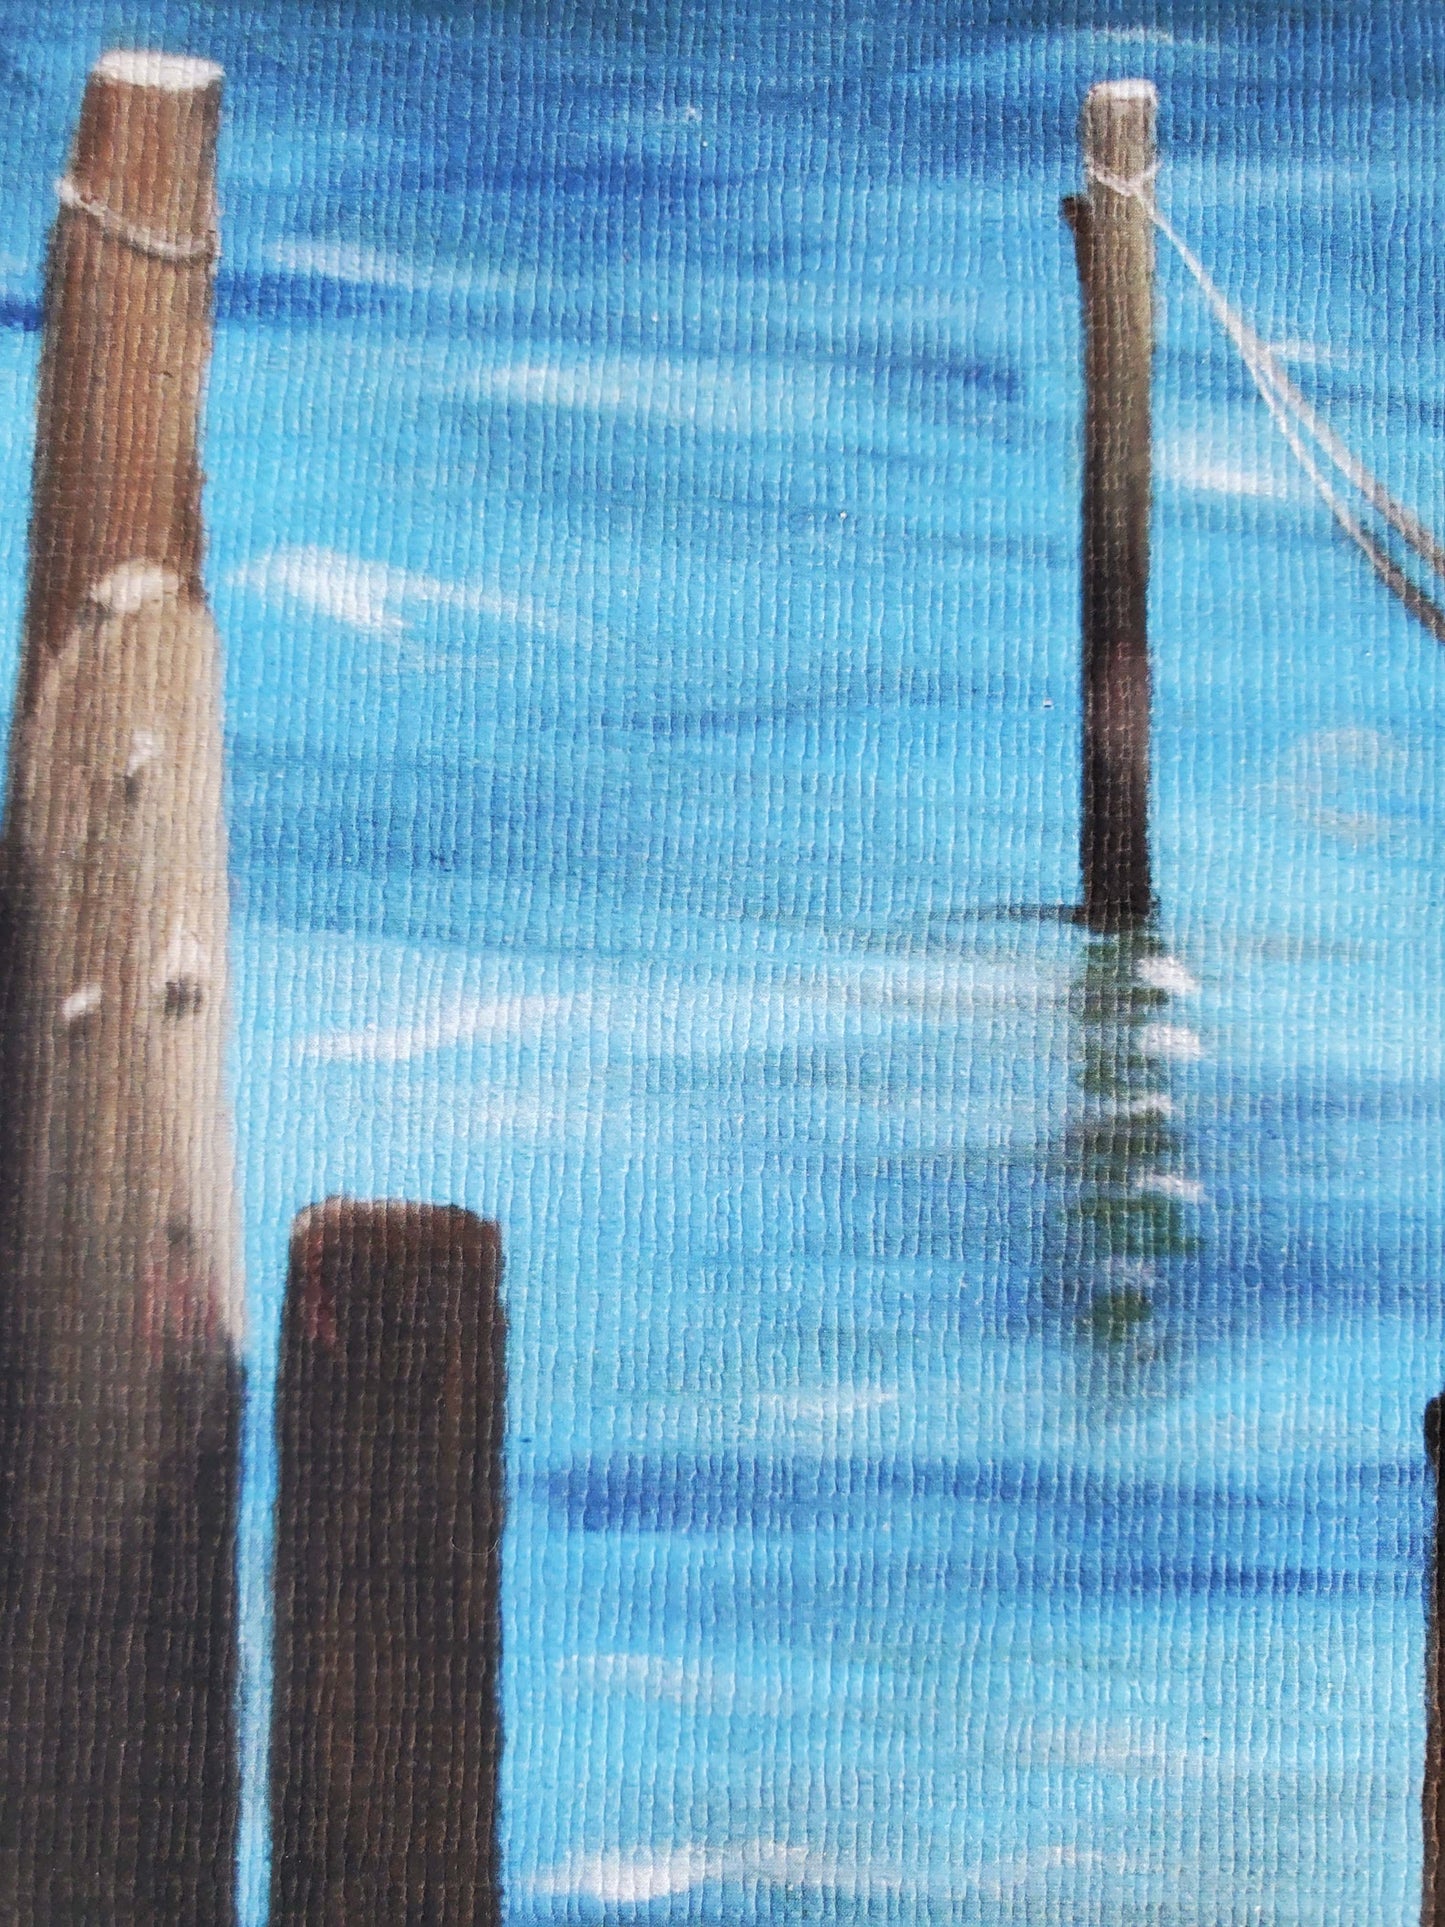 "Wood in the Water" Seascape Artist Print